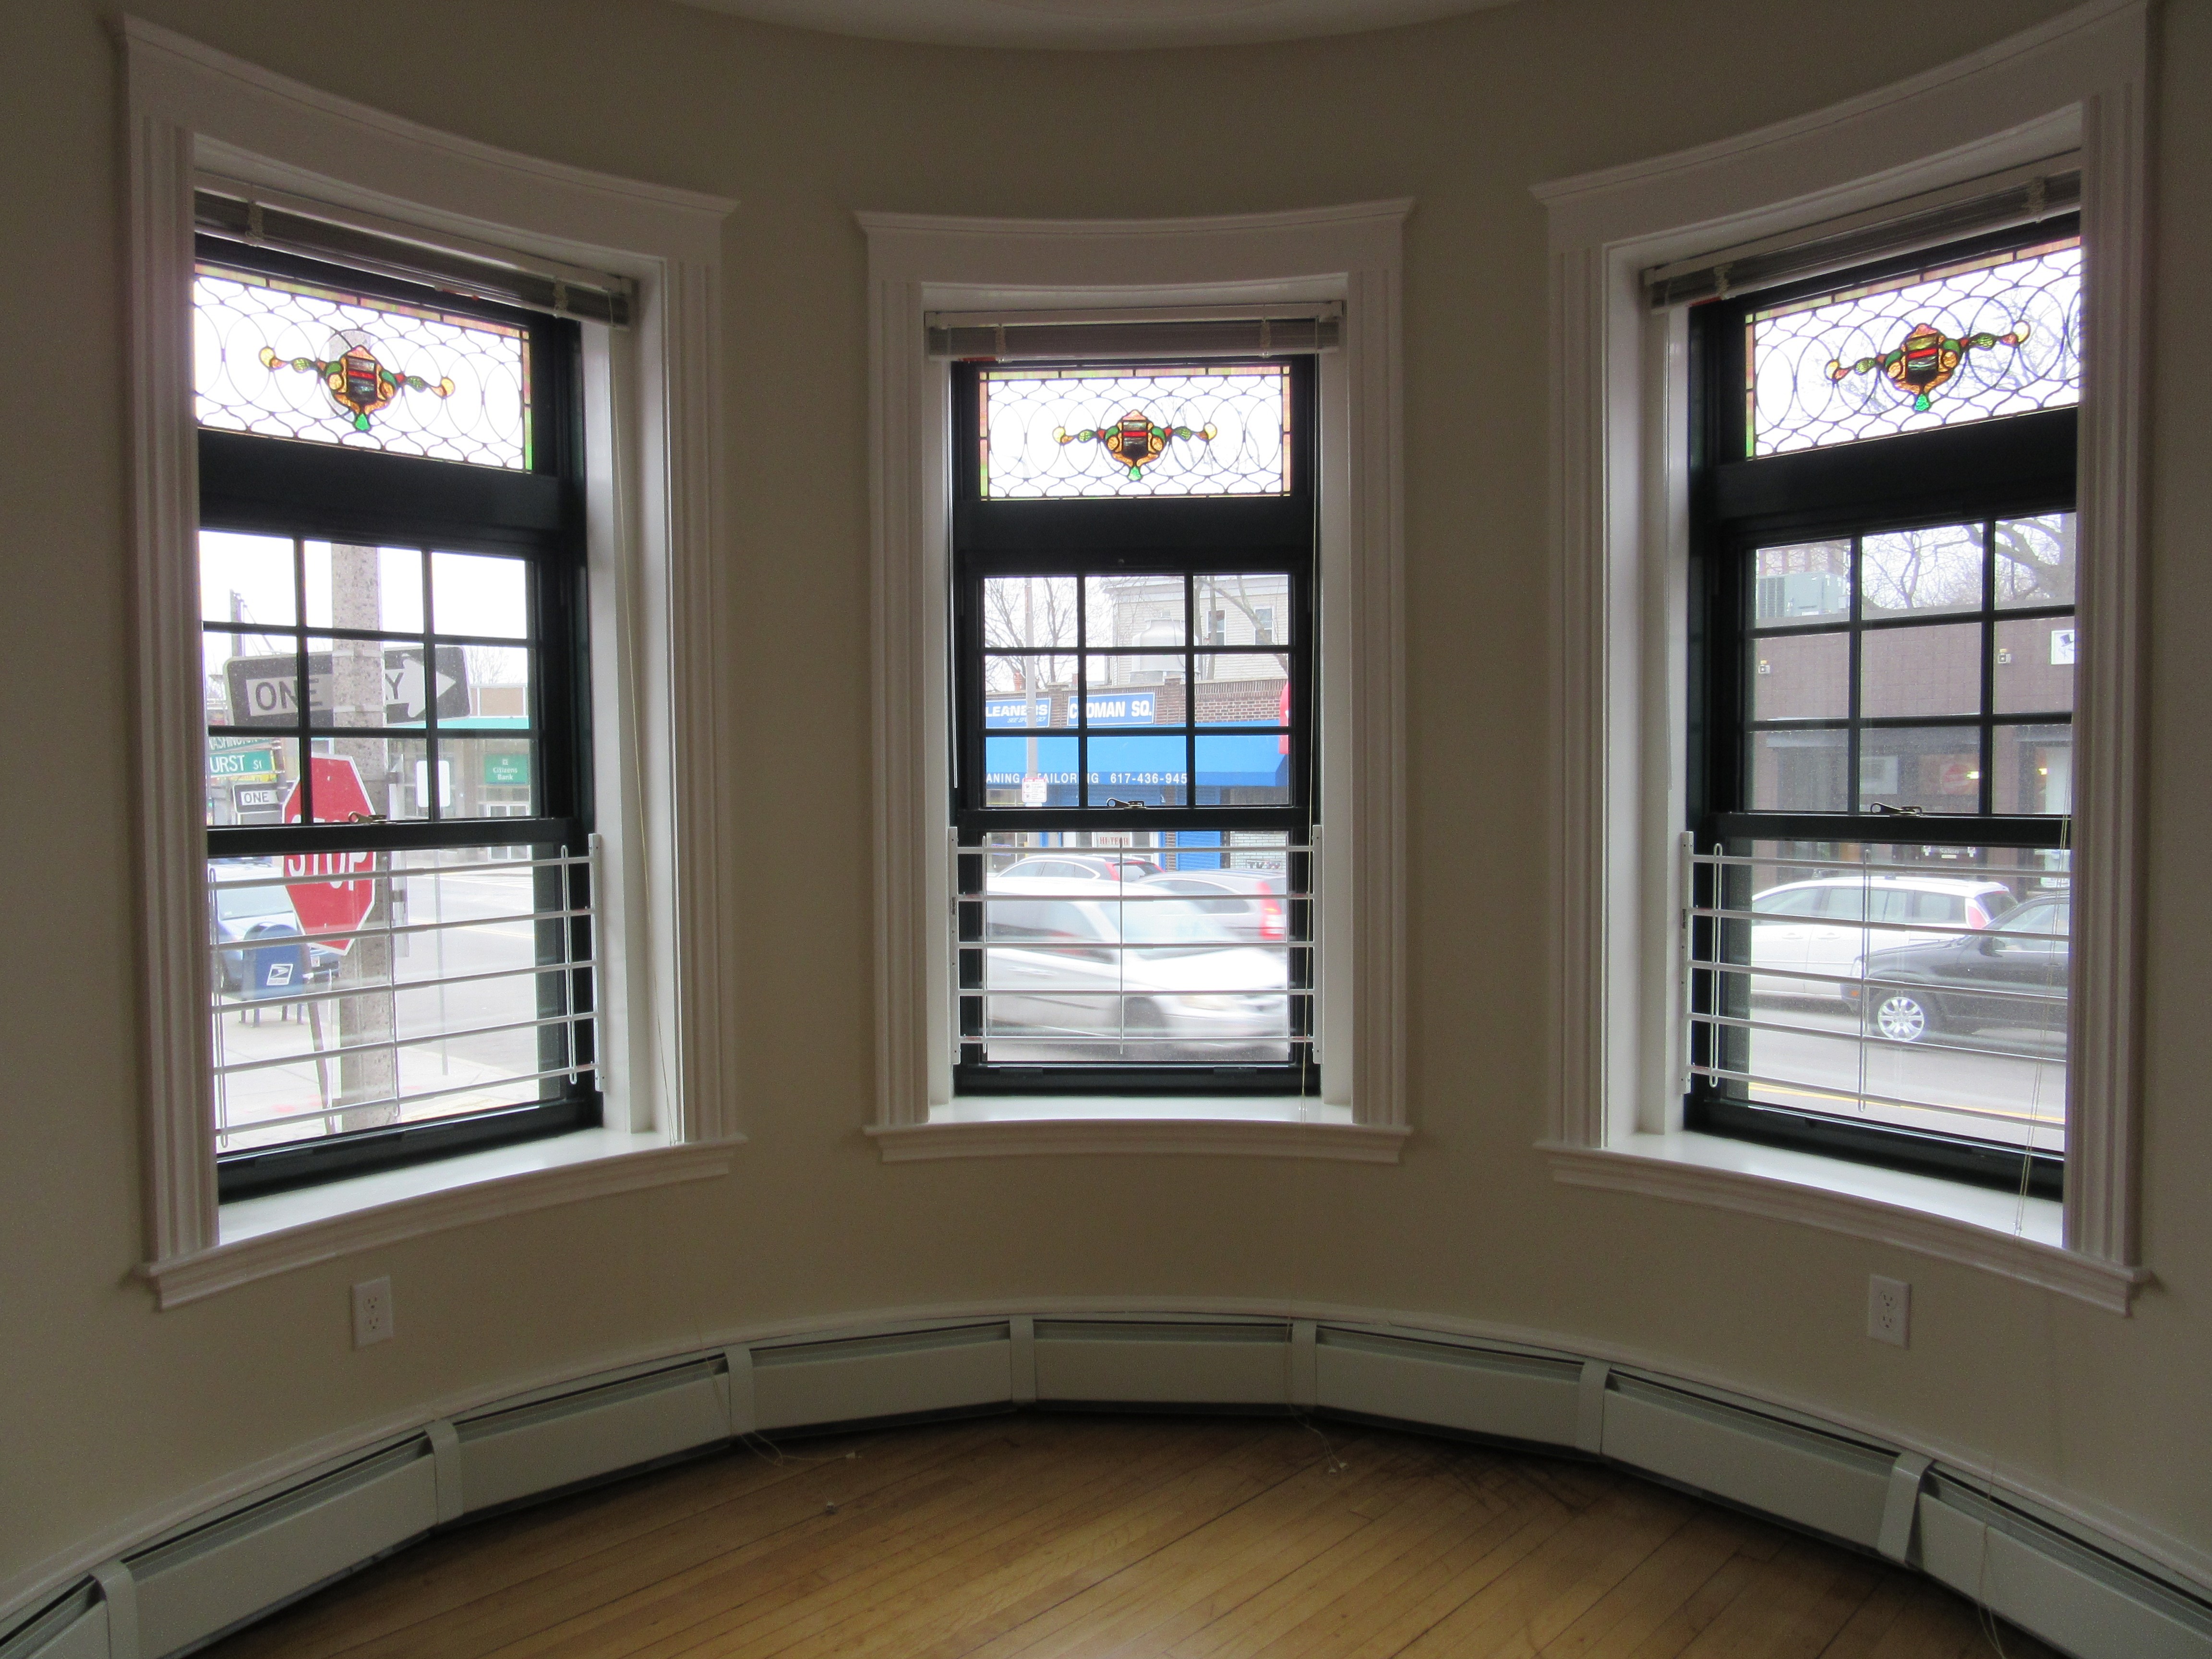 Photograph of the interior of a rehabilitated historic structure in Codman Square’s commercial district, showing a room with three large windows and wood flooring. 